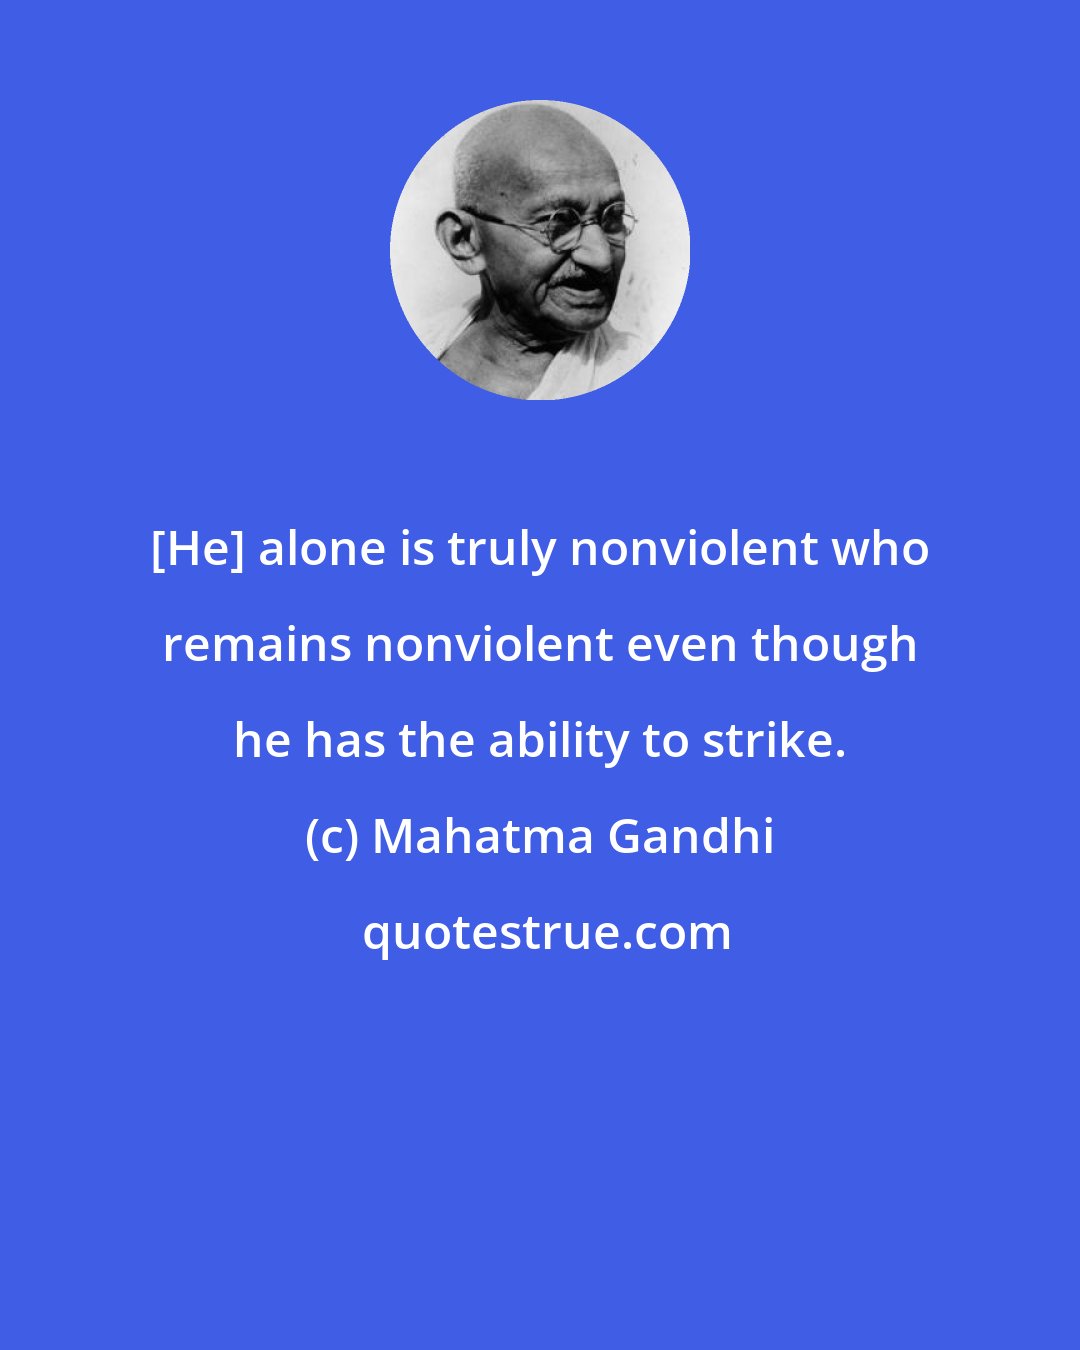 Mahatma Gandhi: [He] alone is truly nonviolent who remains nonviolent even though he has the ability to strike.